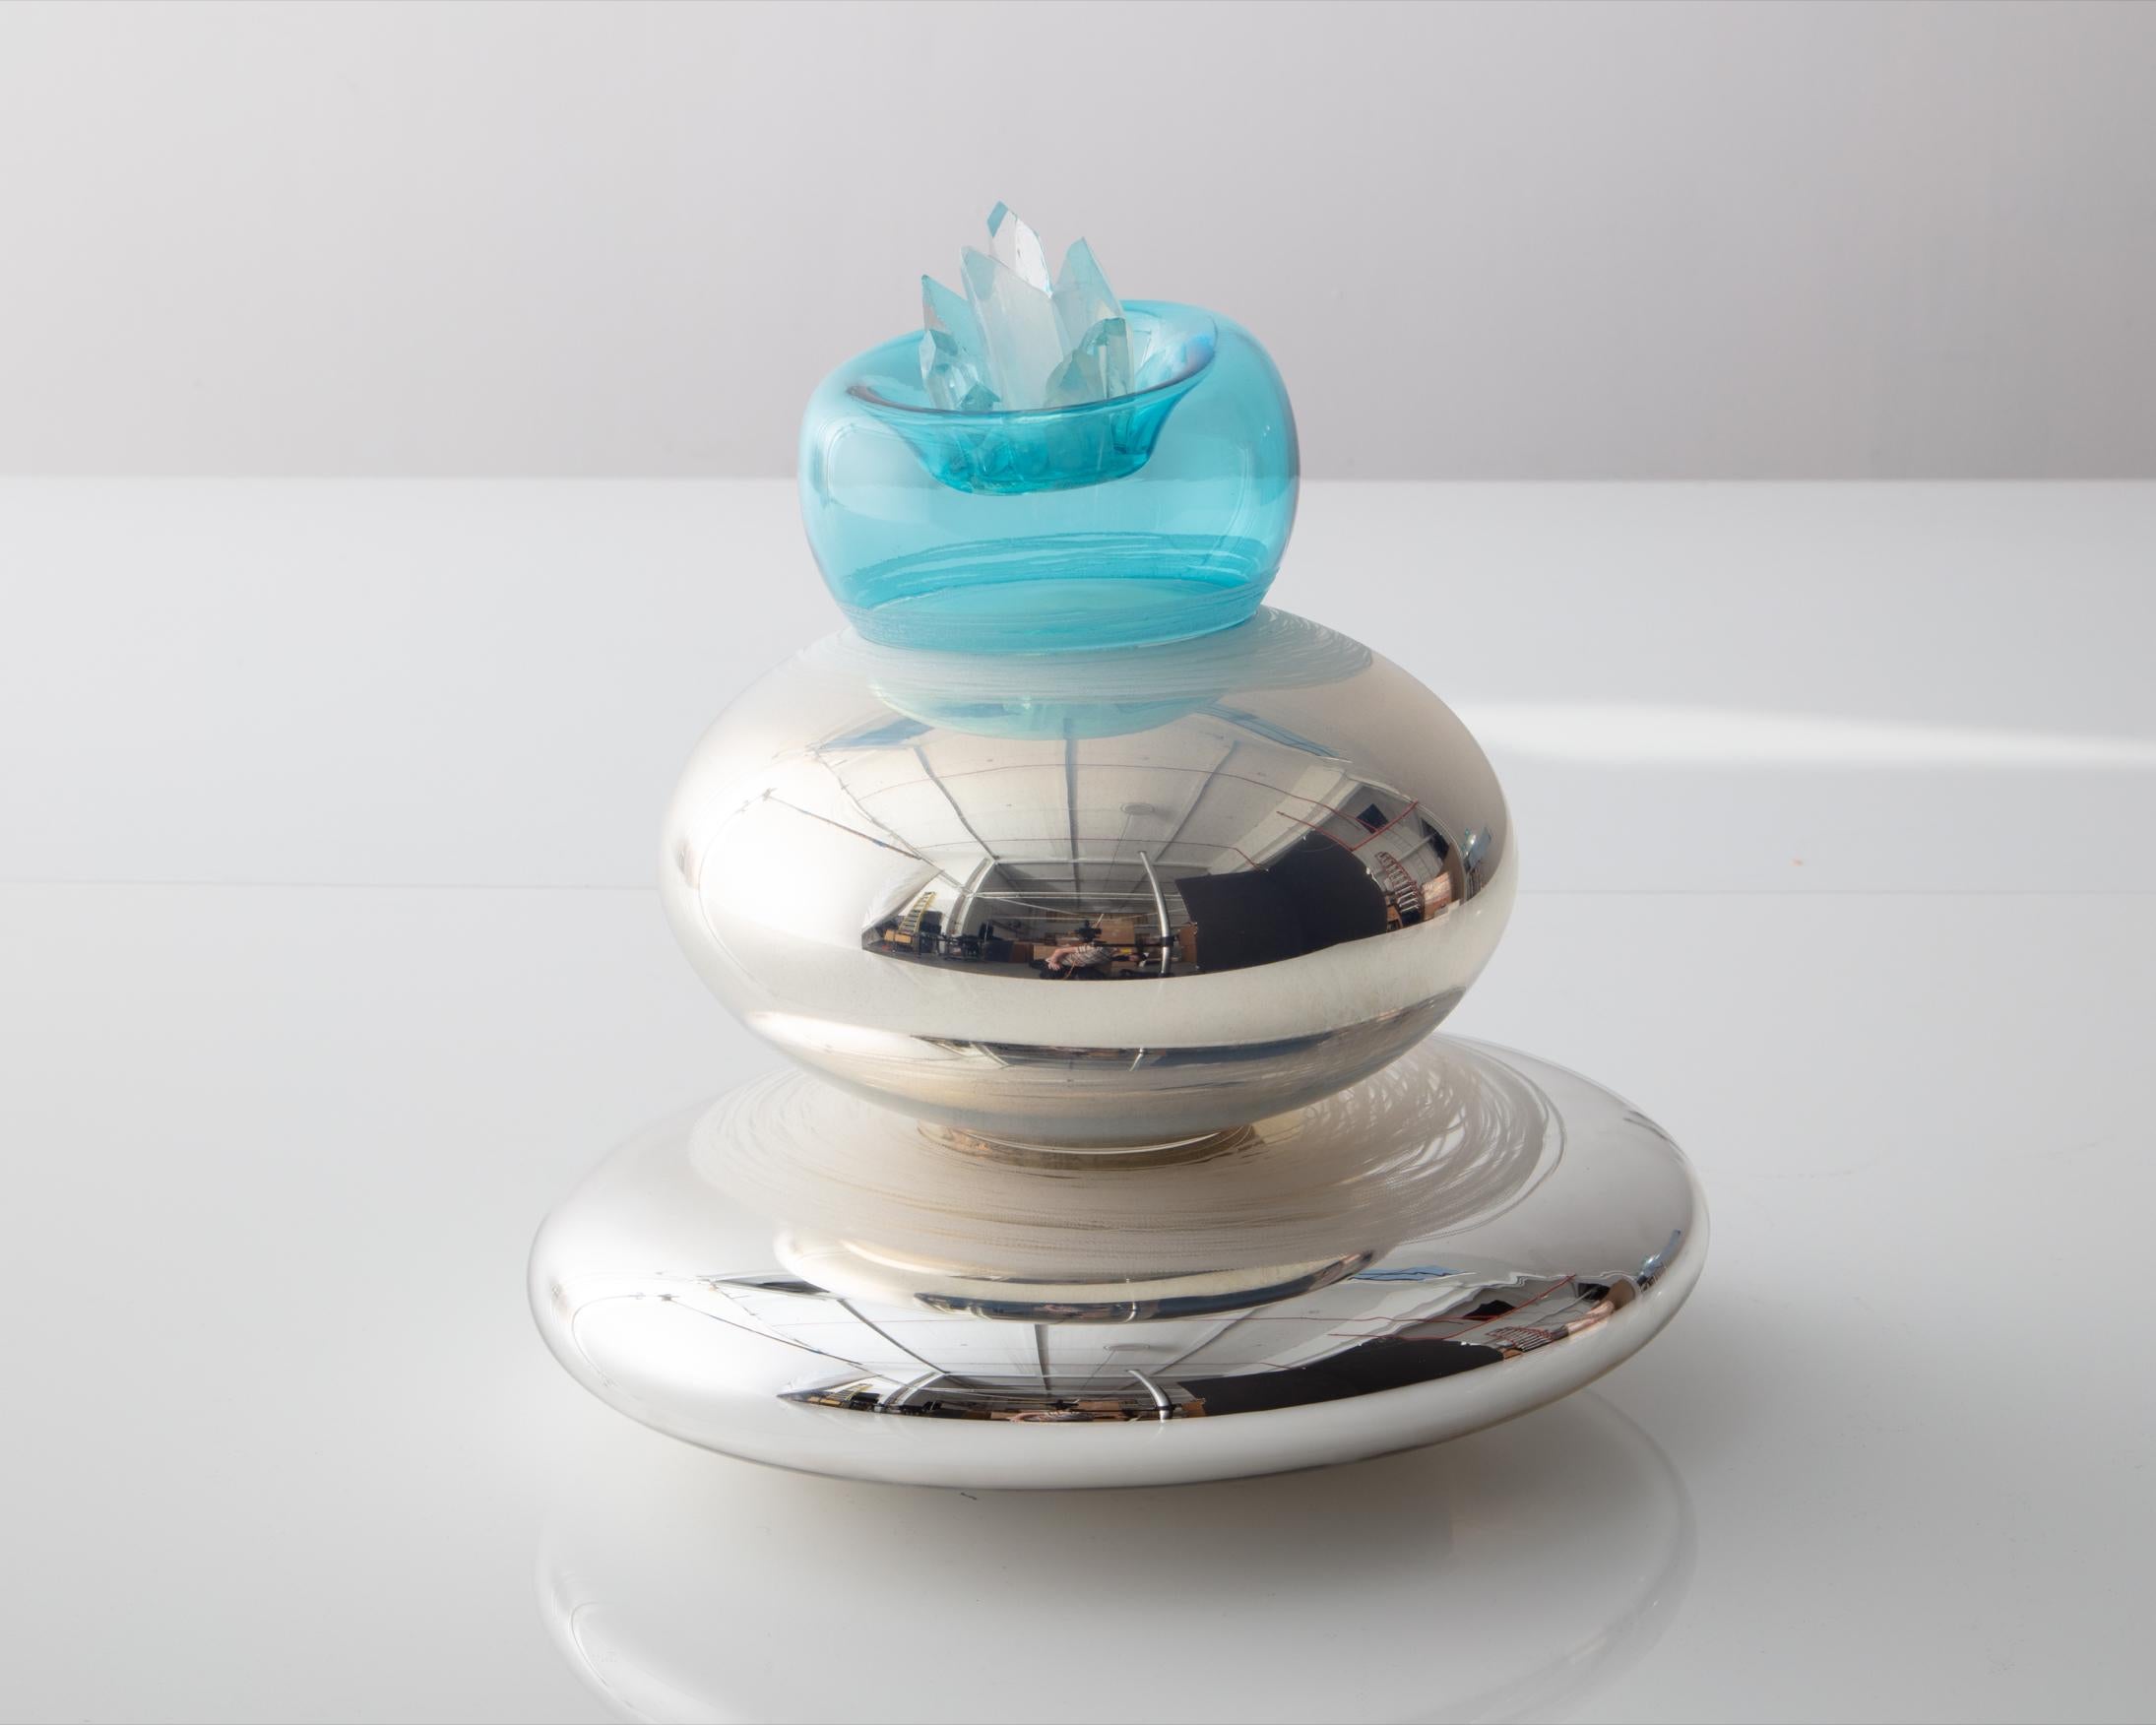 Three-tiered stacked bubble sculpture. Mirrored silver and turquoise applied glass crystals. Etched circles on mirrored tiers, signed on bottom with felt pad. Designed and made by Jeff Zimmerman, USA, 2021.